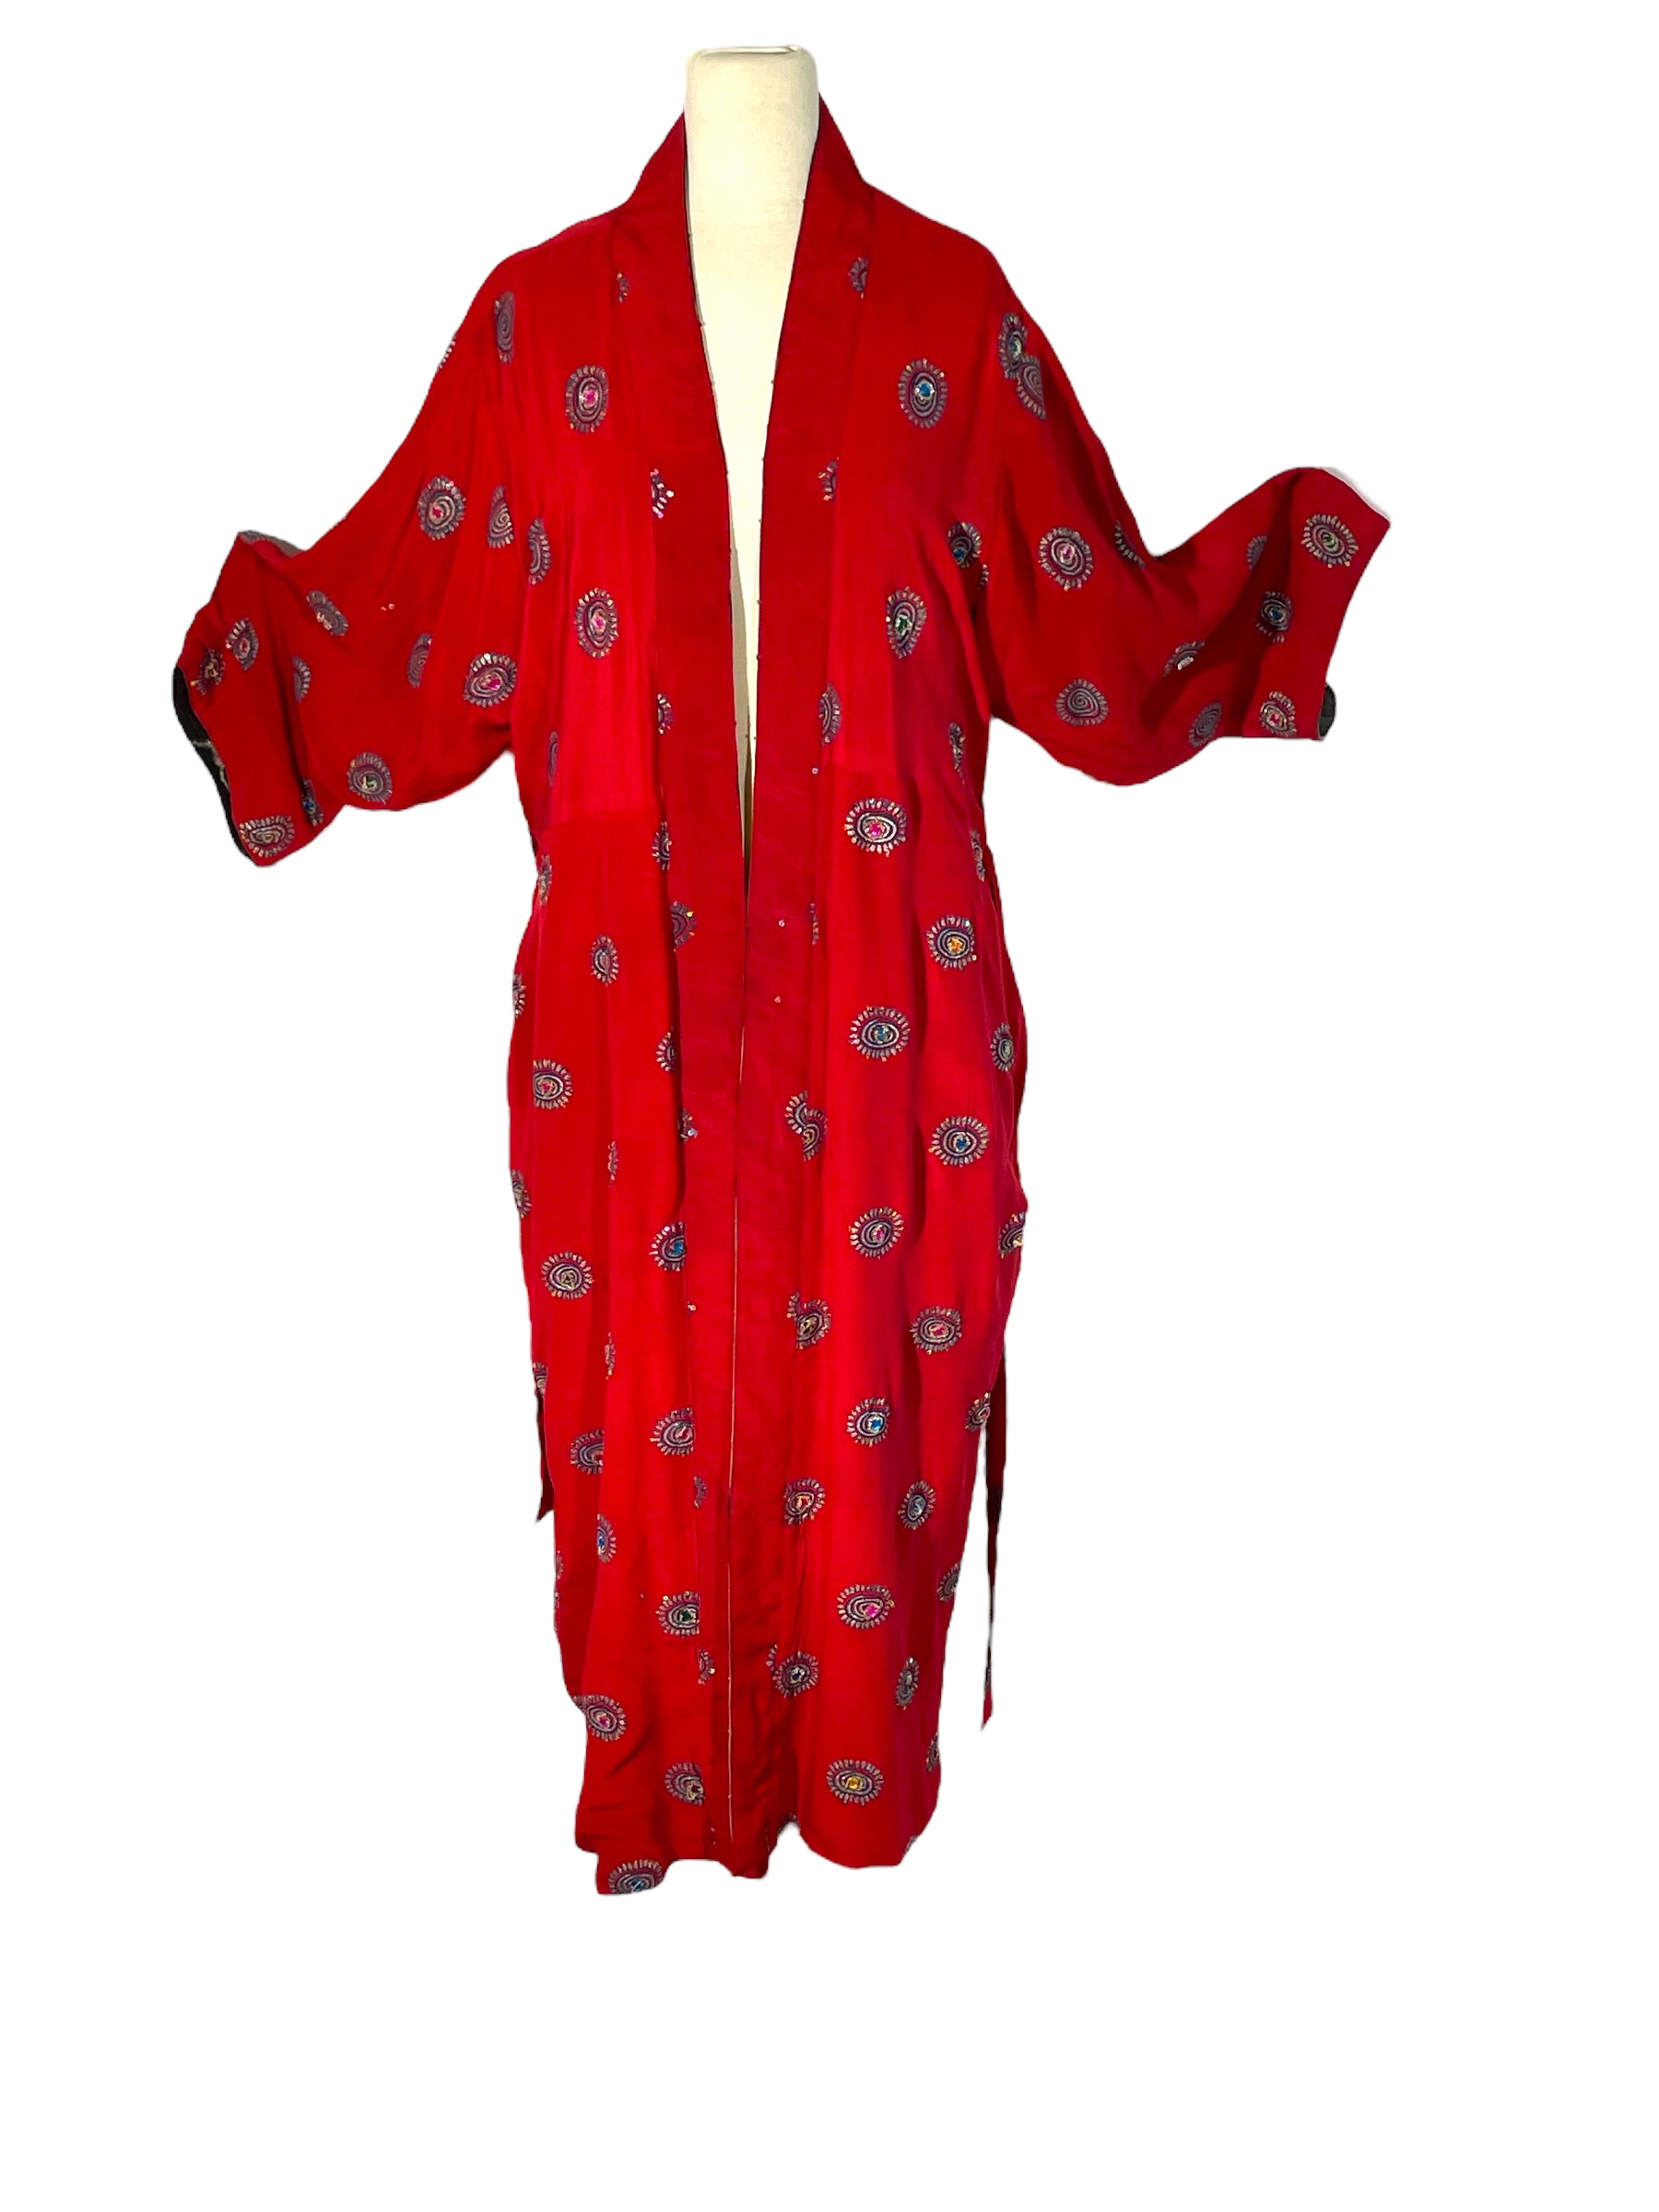 RD-107 Really Really Red Reversible Duster